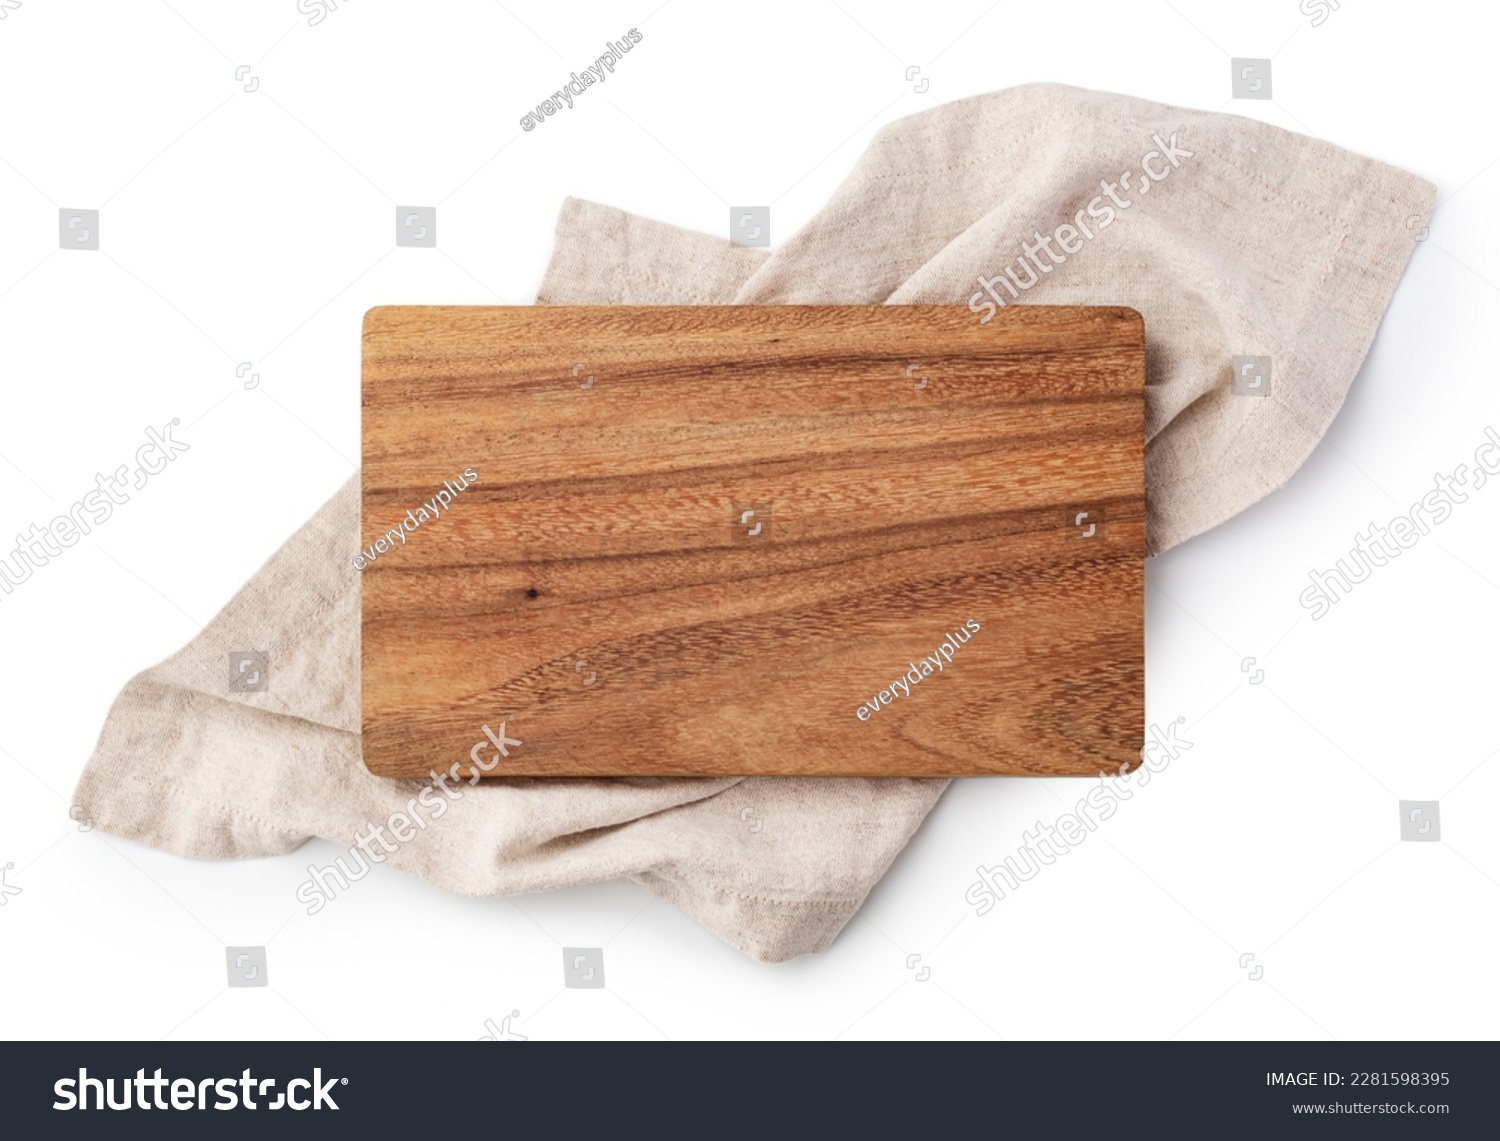 Wooden cutting board on linen napkin isolated on white background, top view #2281598395